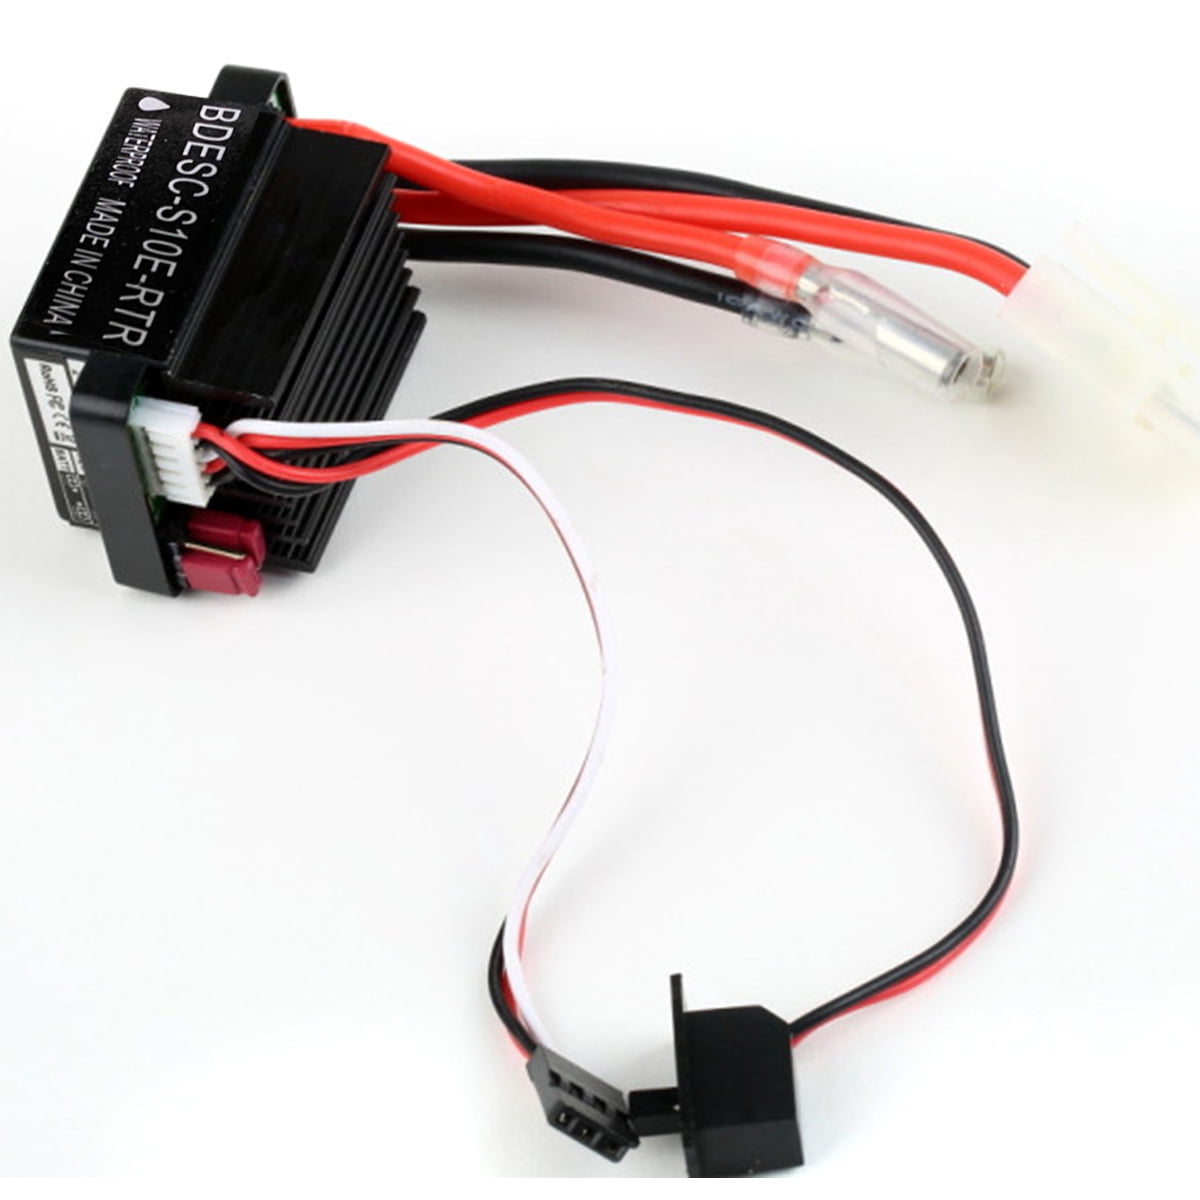 320A Waterproof Brushed ESC Electronic Speed Controller For RC Car Boat Motor US 